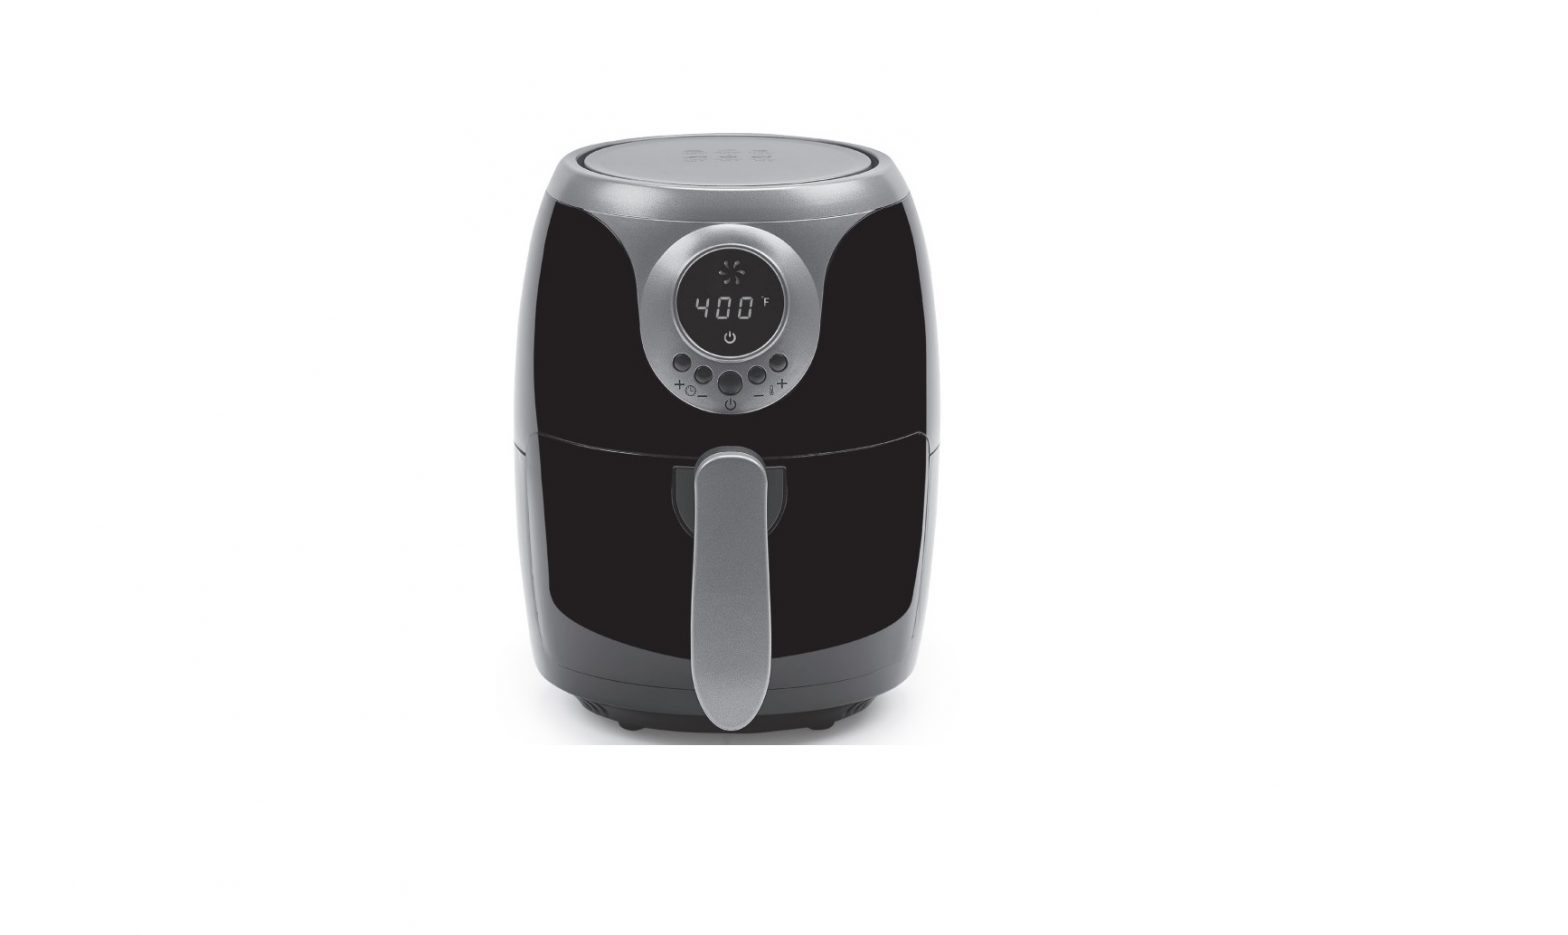 Copper Chef AF002 Turbo Cyclonic Air Fryer Owner’s Manual